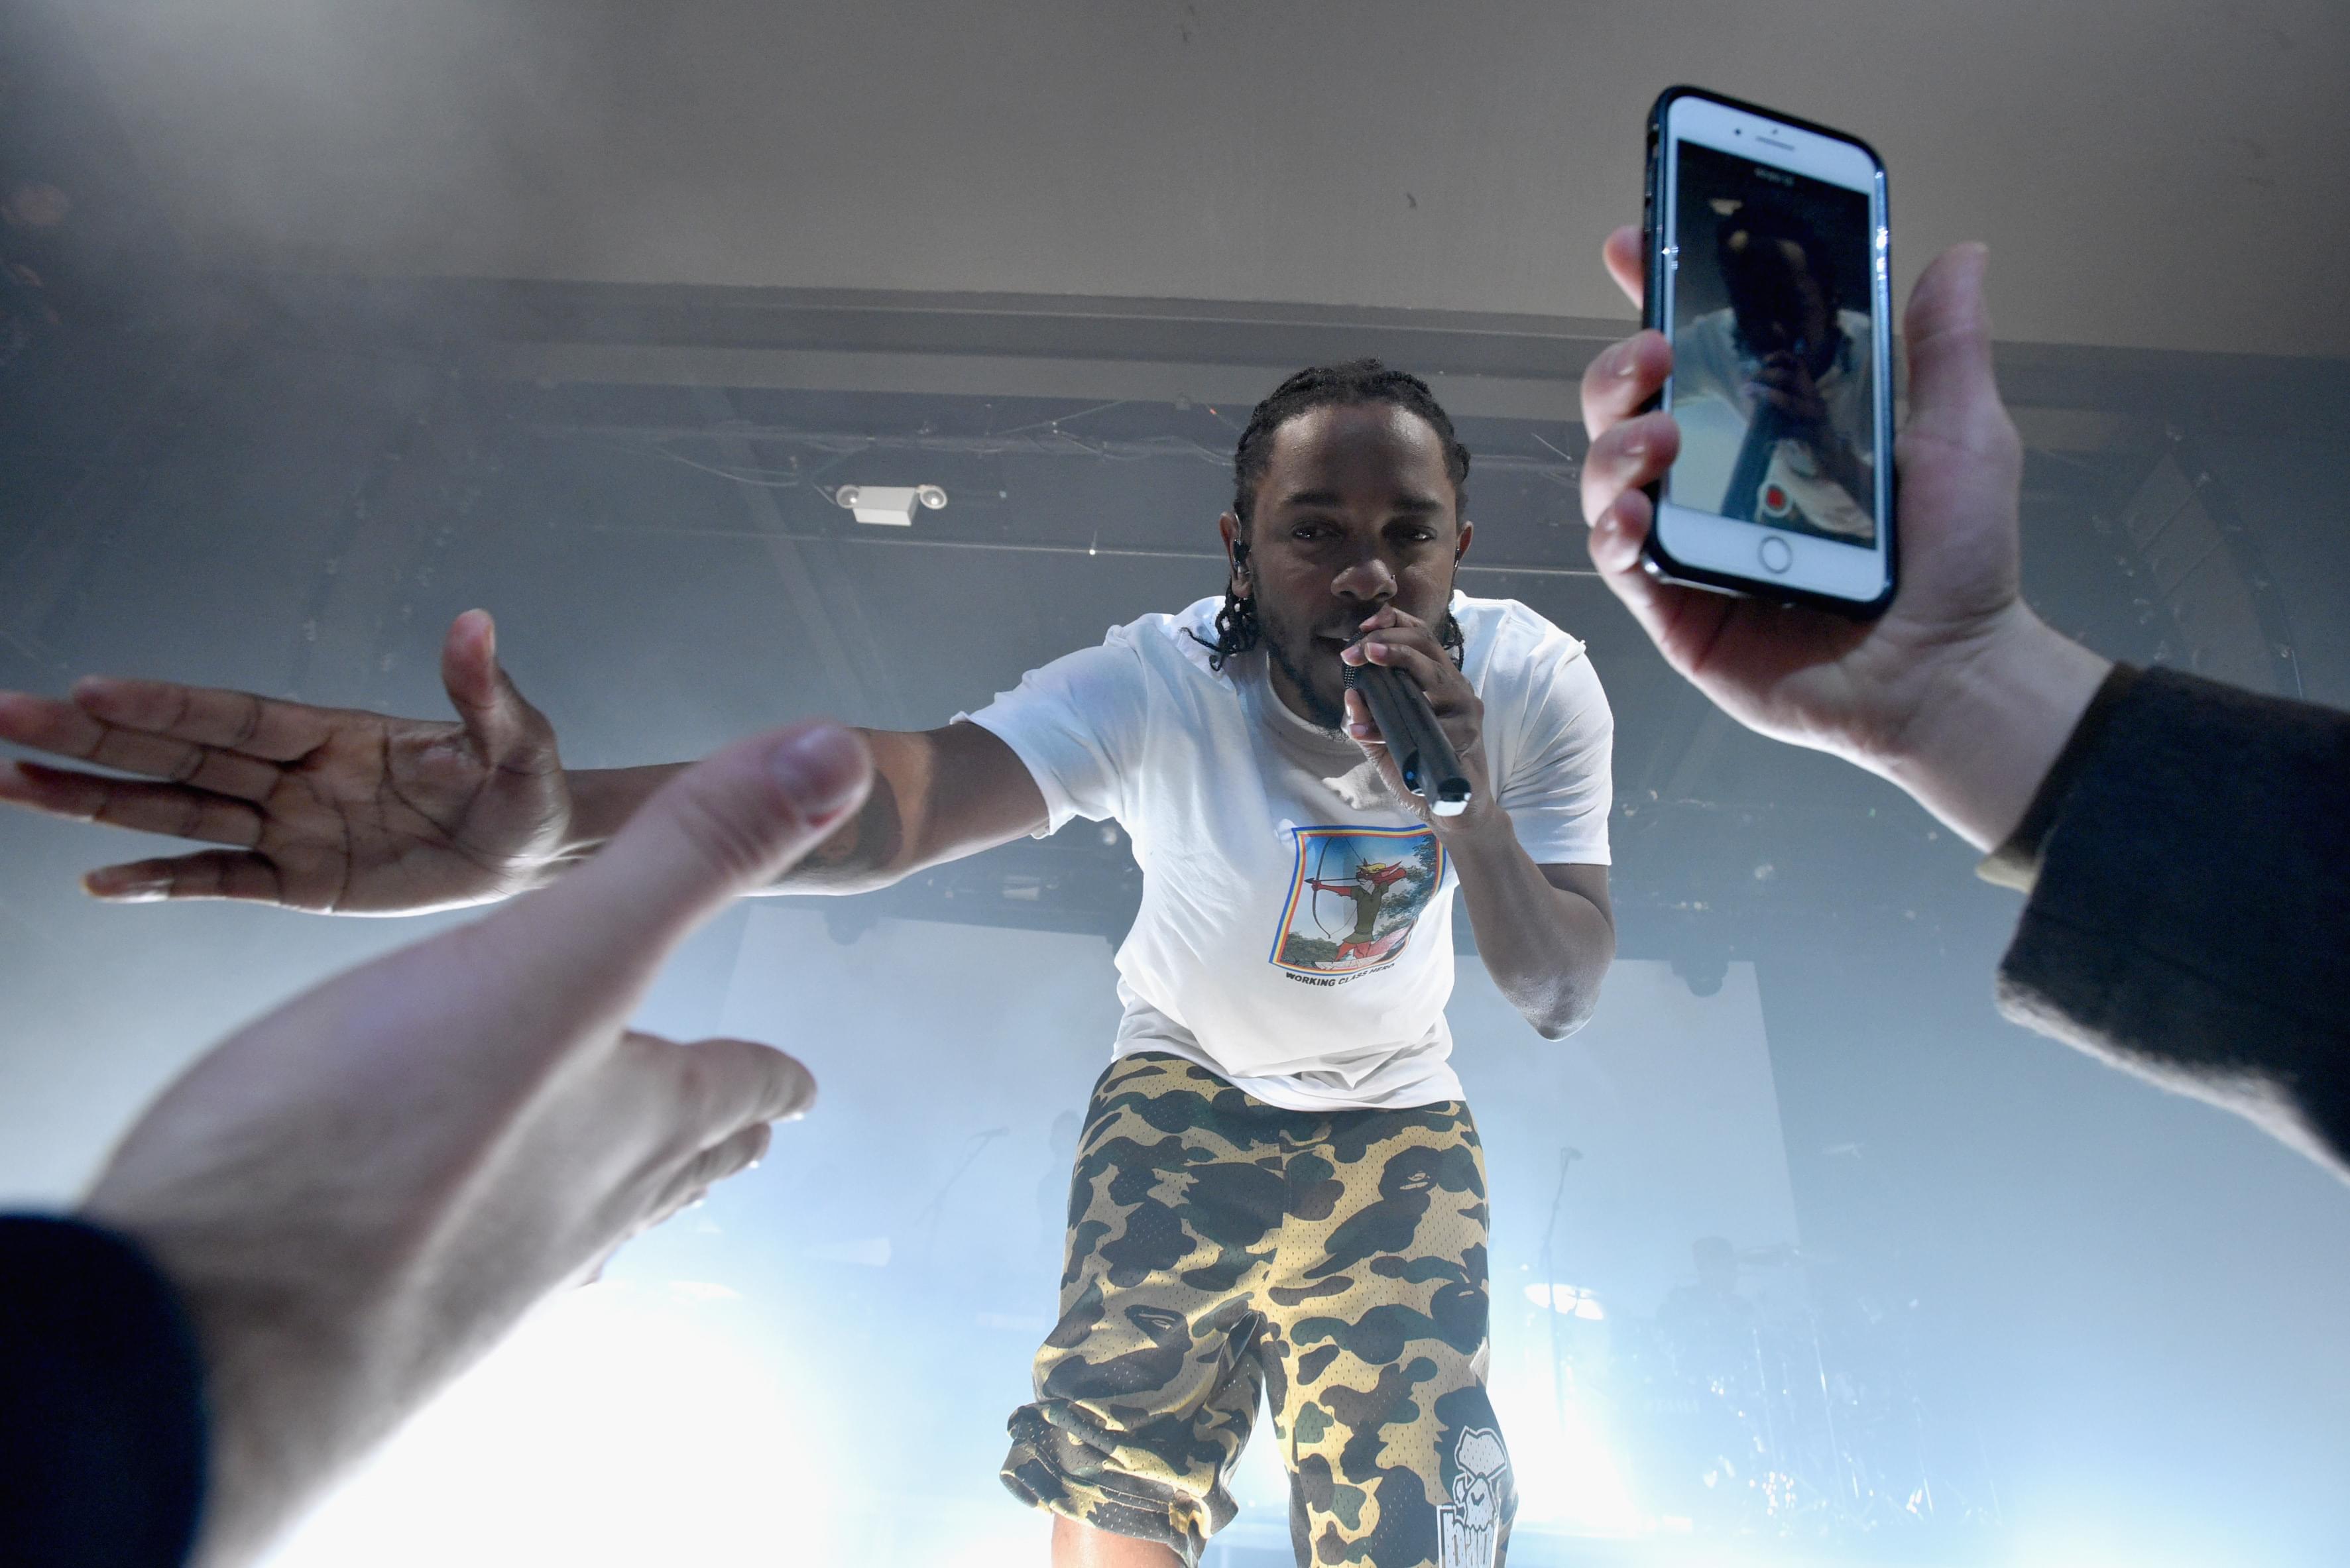 Kendrick Lamar’s “HUMBLE.” Is Already Making Major Moves On The Charts [LOOK]